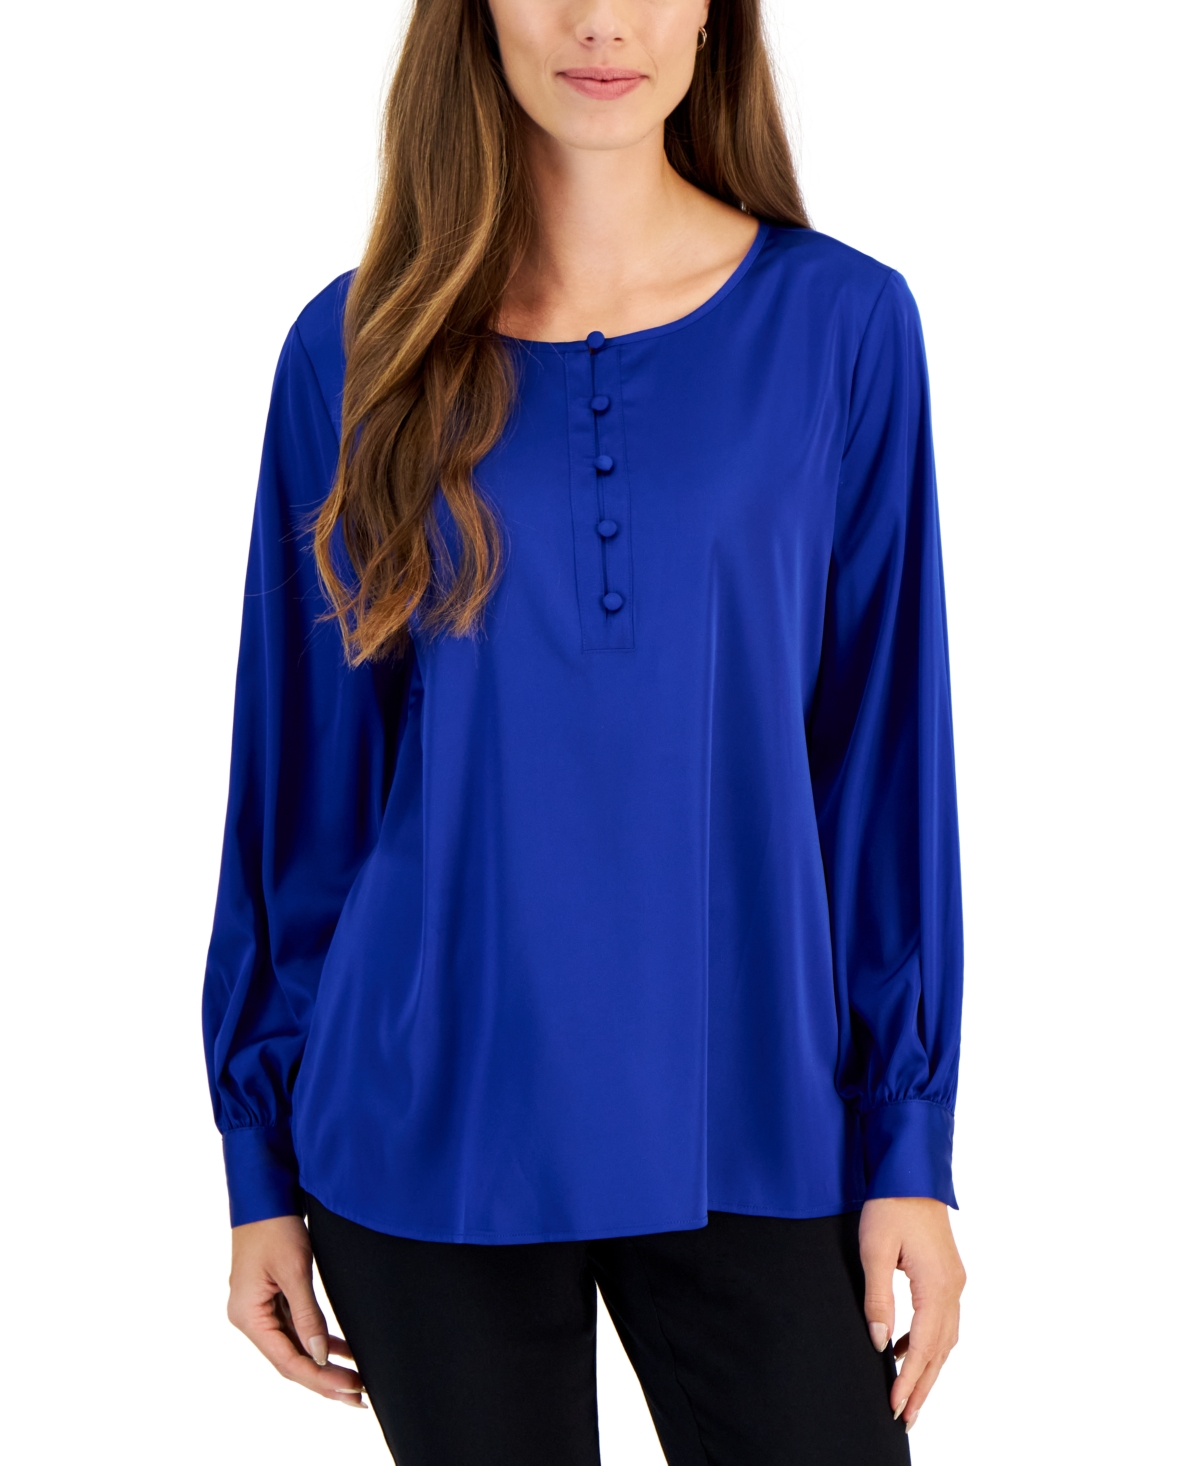 Petite Satin Button-Up Blouse, Created for Macy's - Intrepid Blue